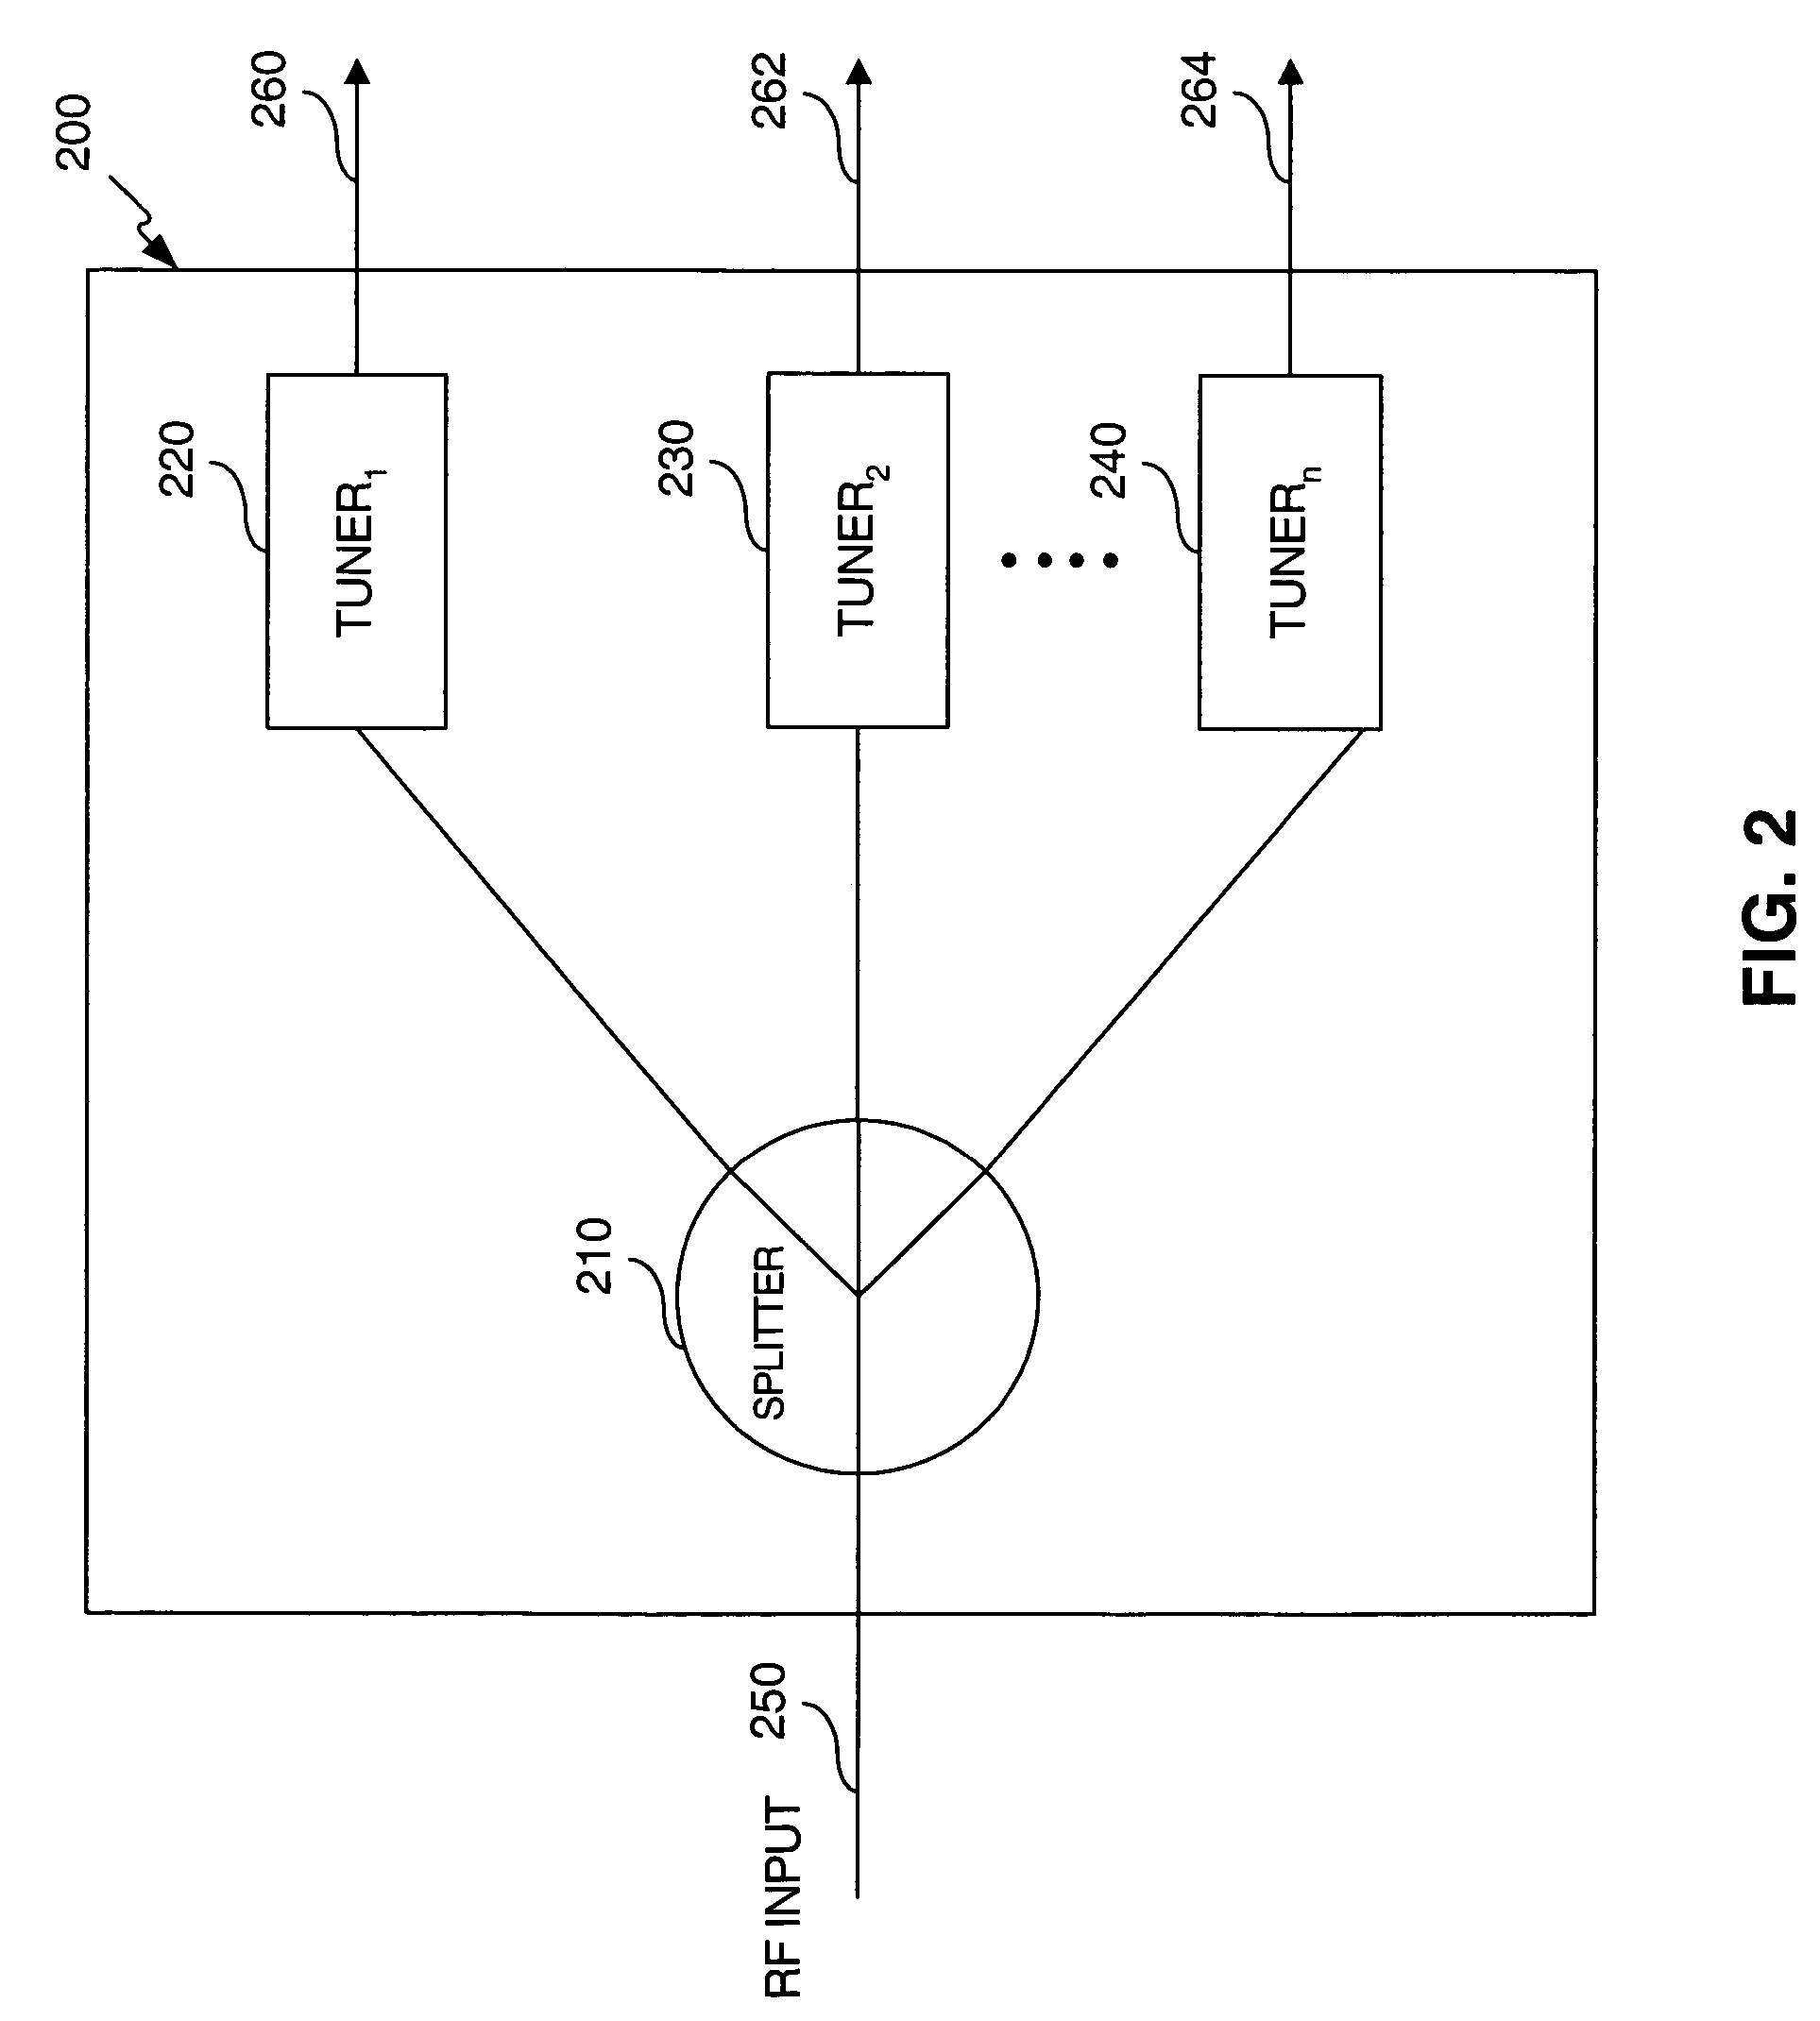 Multi-tuner receivers with cross talk reduction